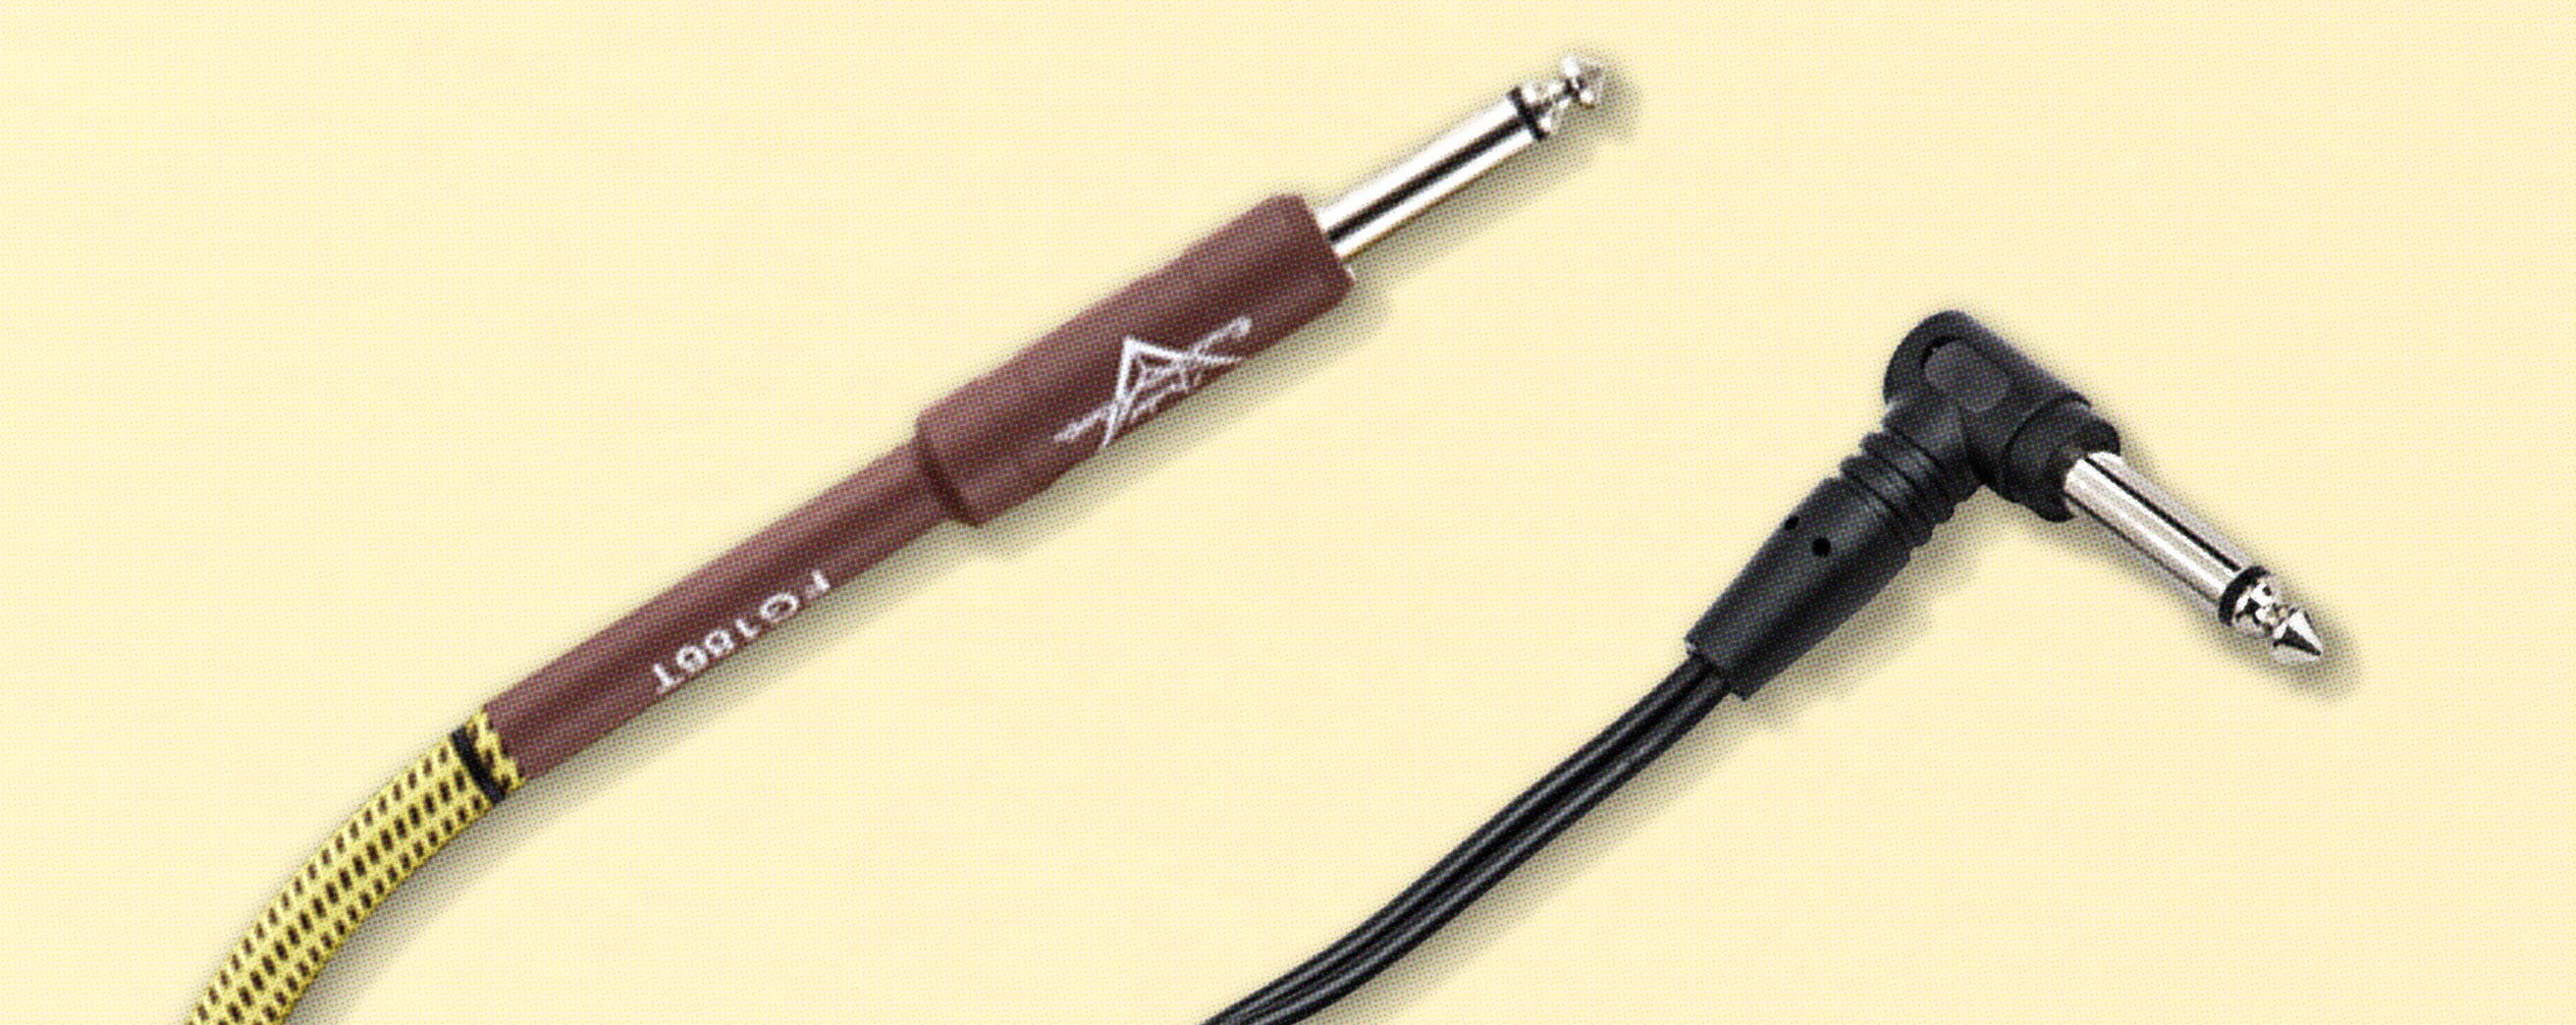 Does a Good Subwoofer Cable Make a Difference? - My Site